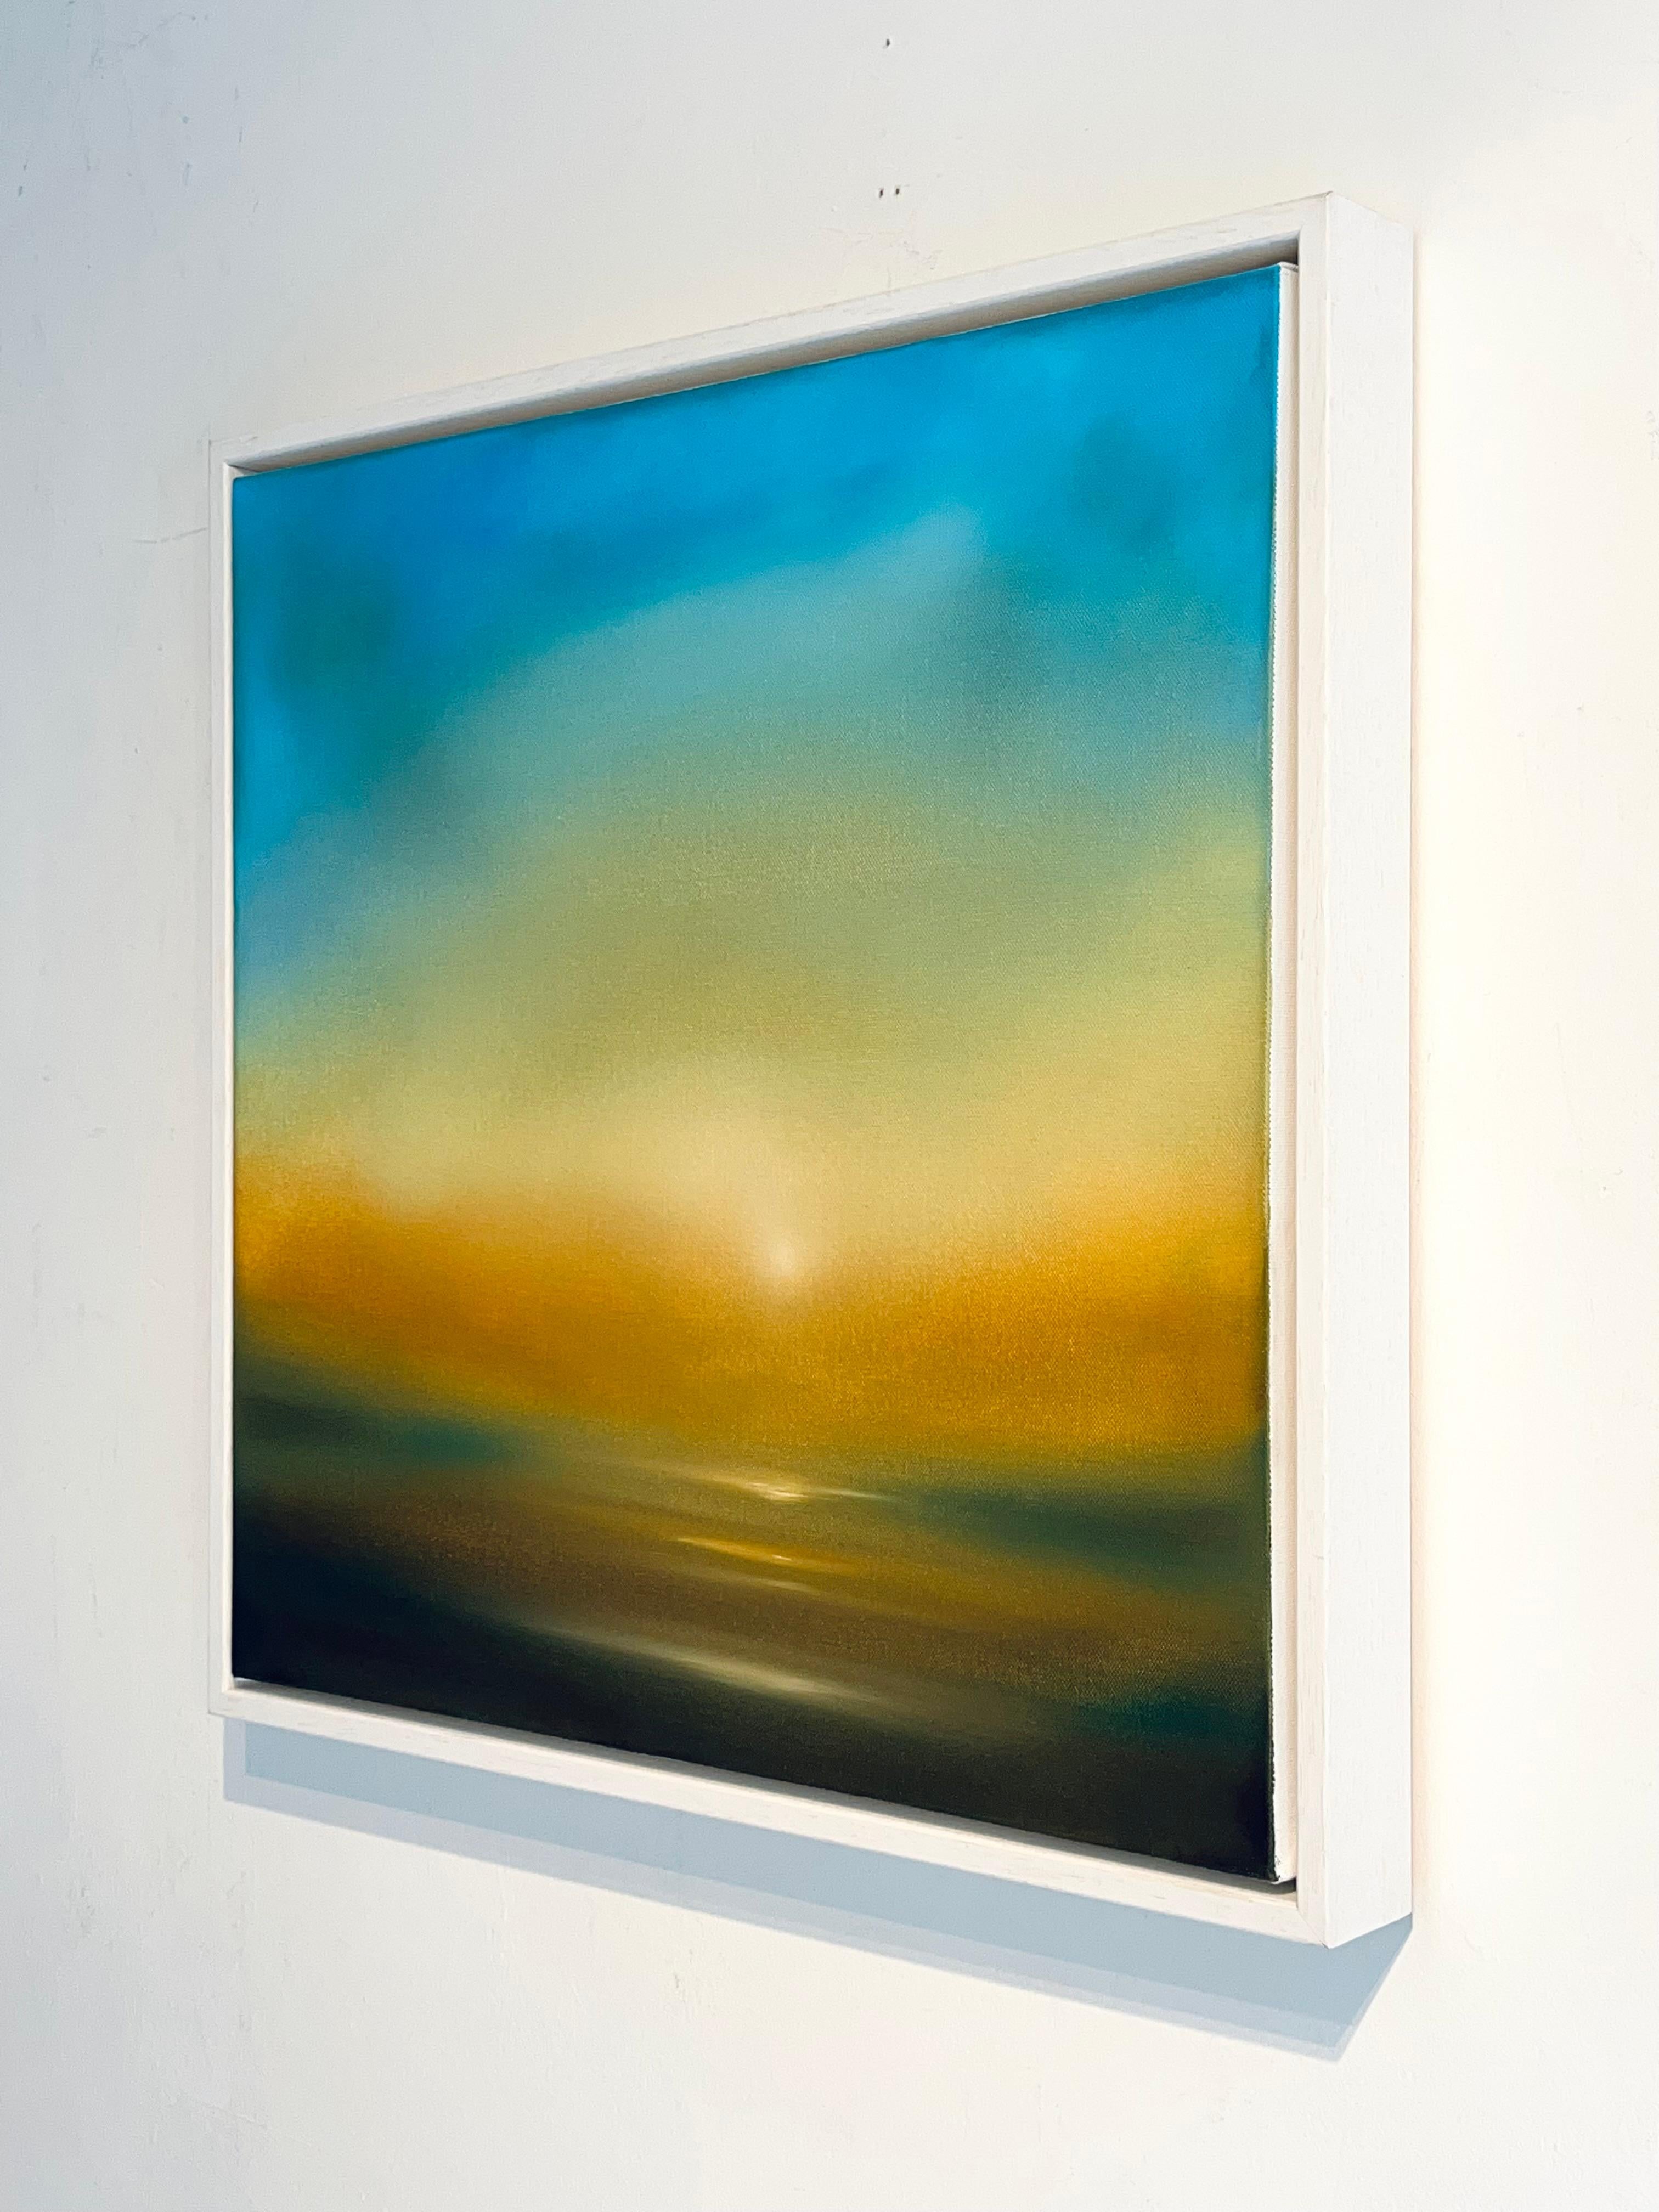 Golden Glow-original abstract seascape-ocean sunset painting-contemporary Art - Painting by Jonathan Speed